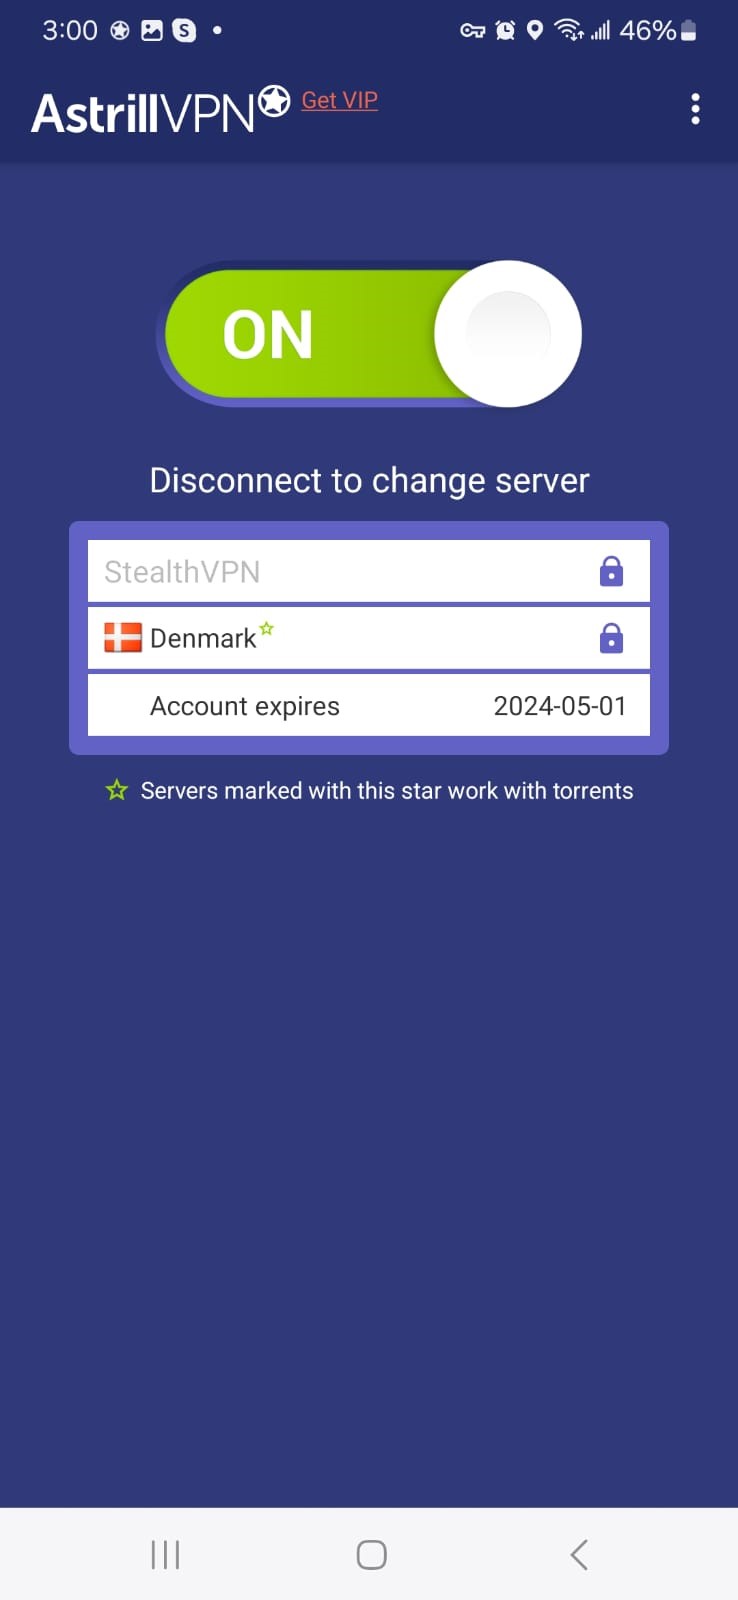 turn on the VPN connection